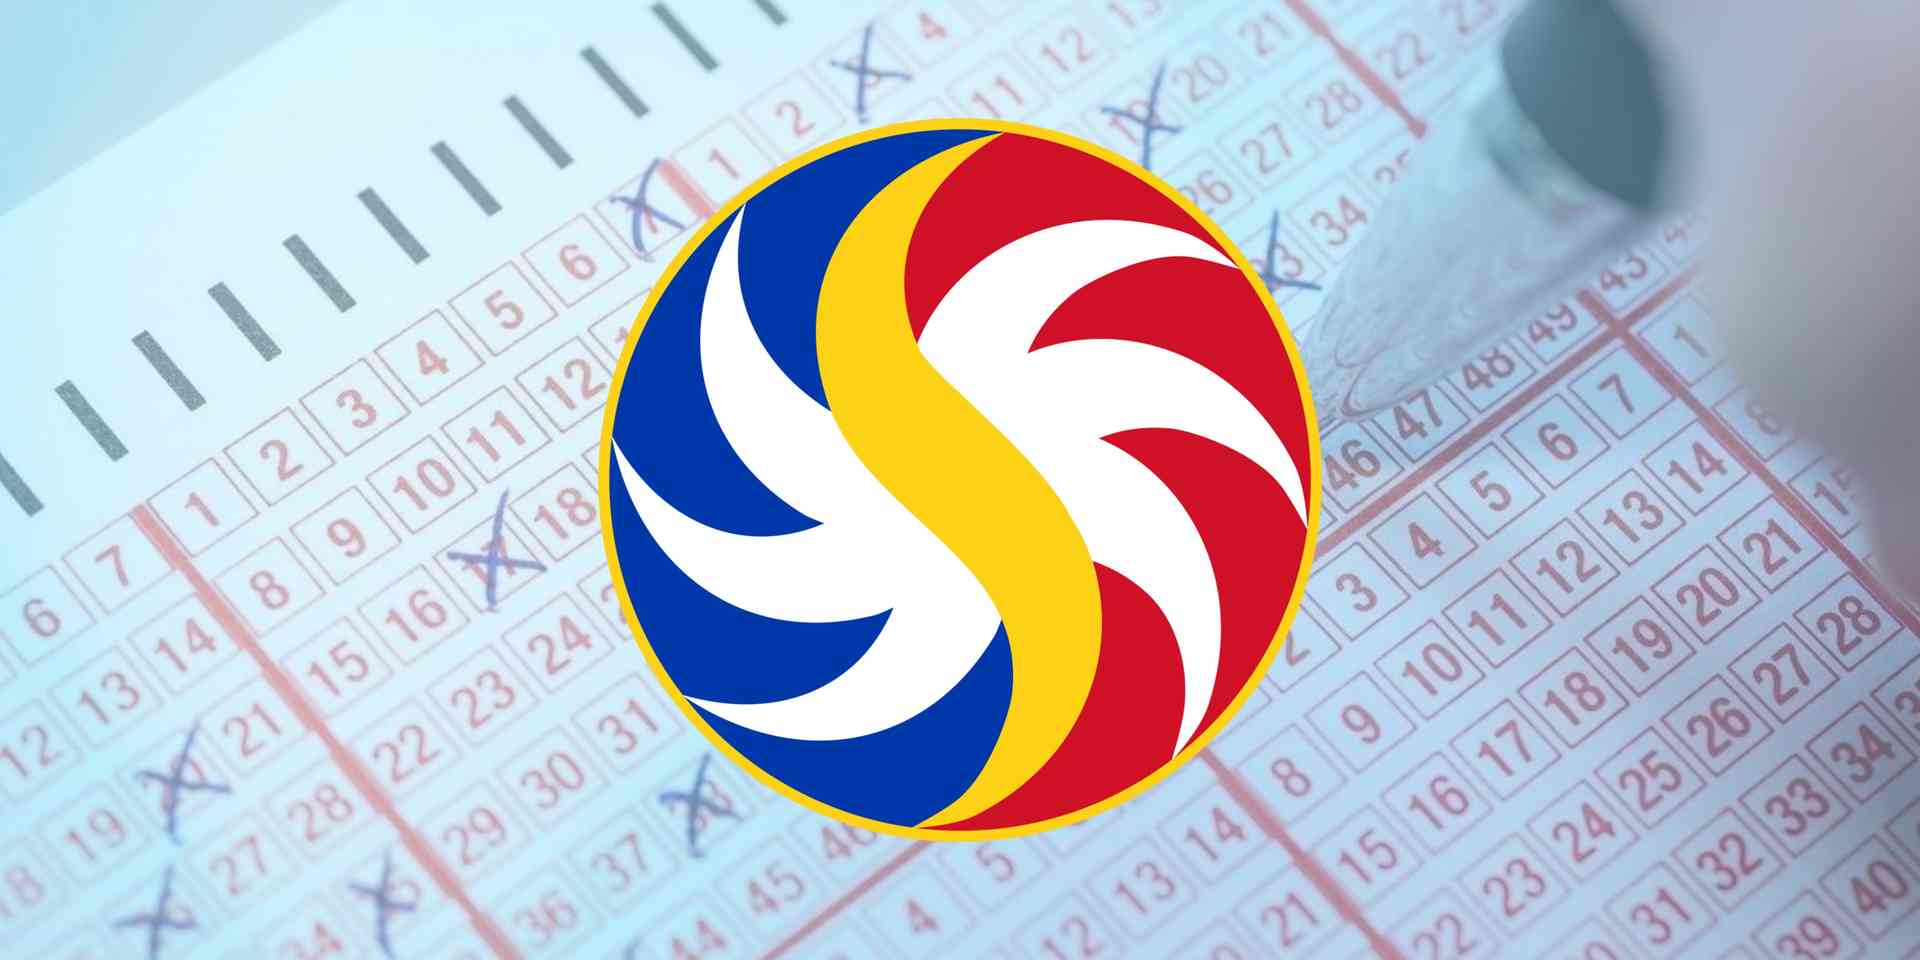 PCSO Lotto Draw Results on Sunday, April 14